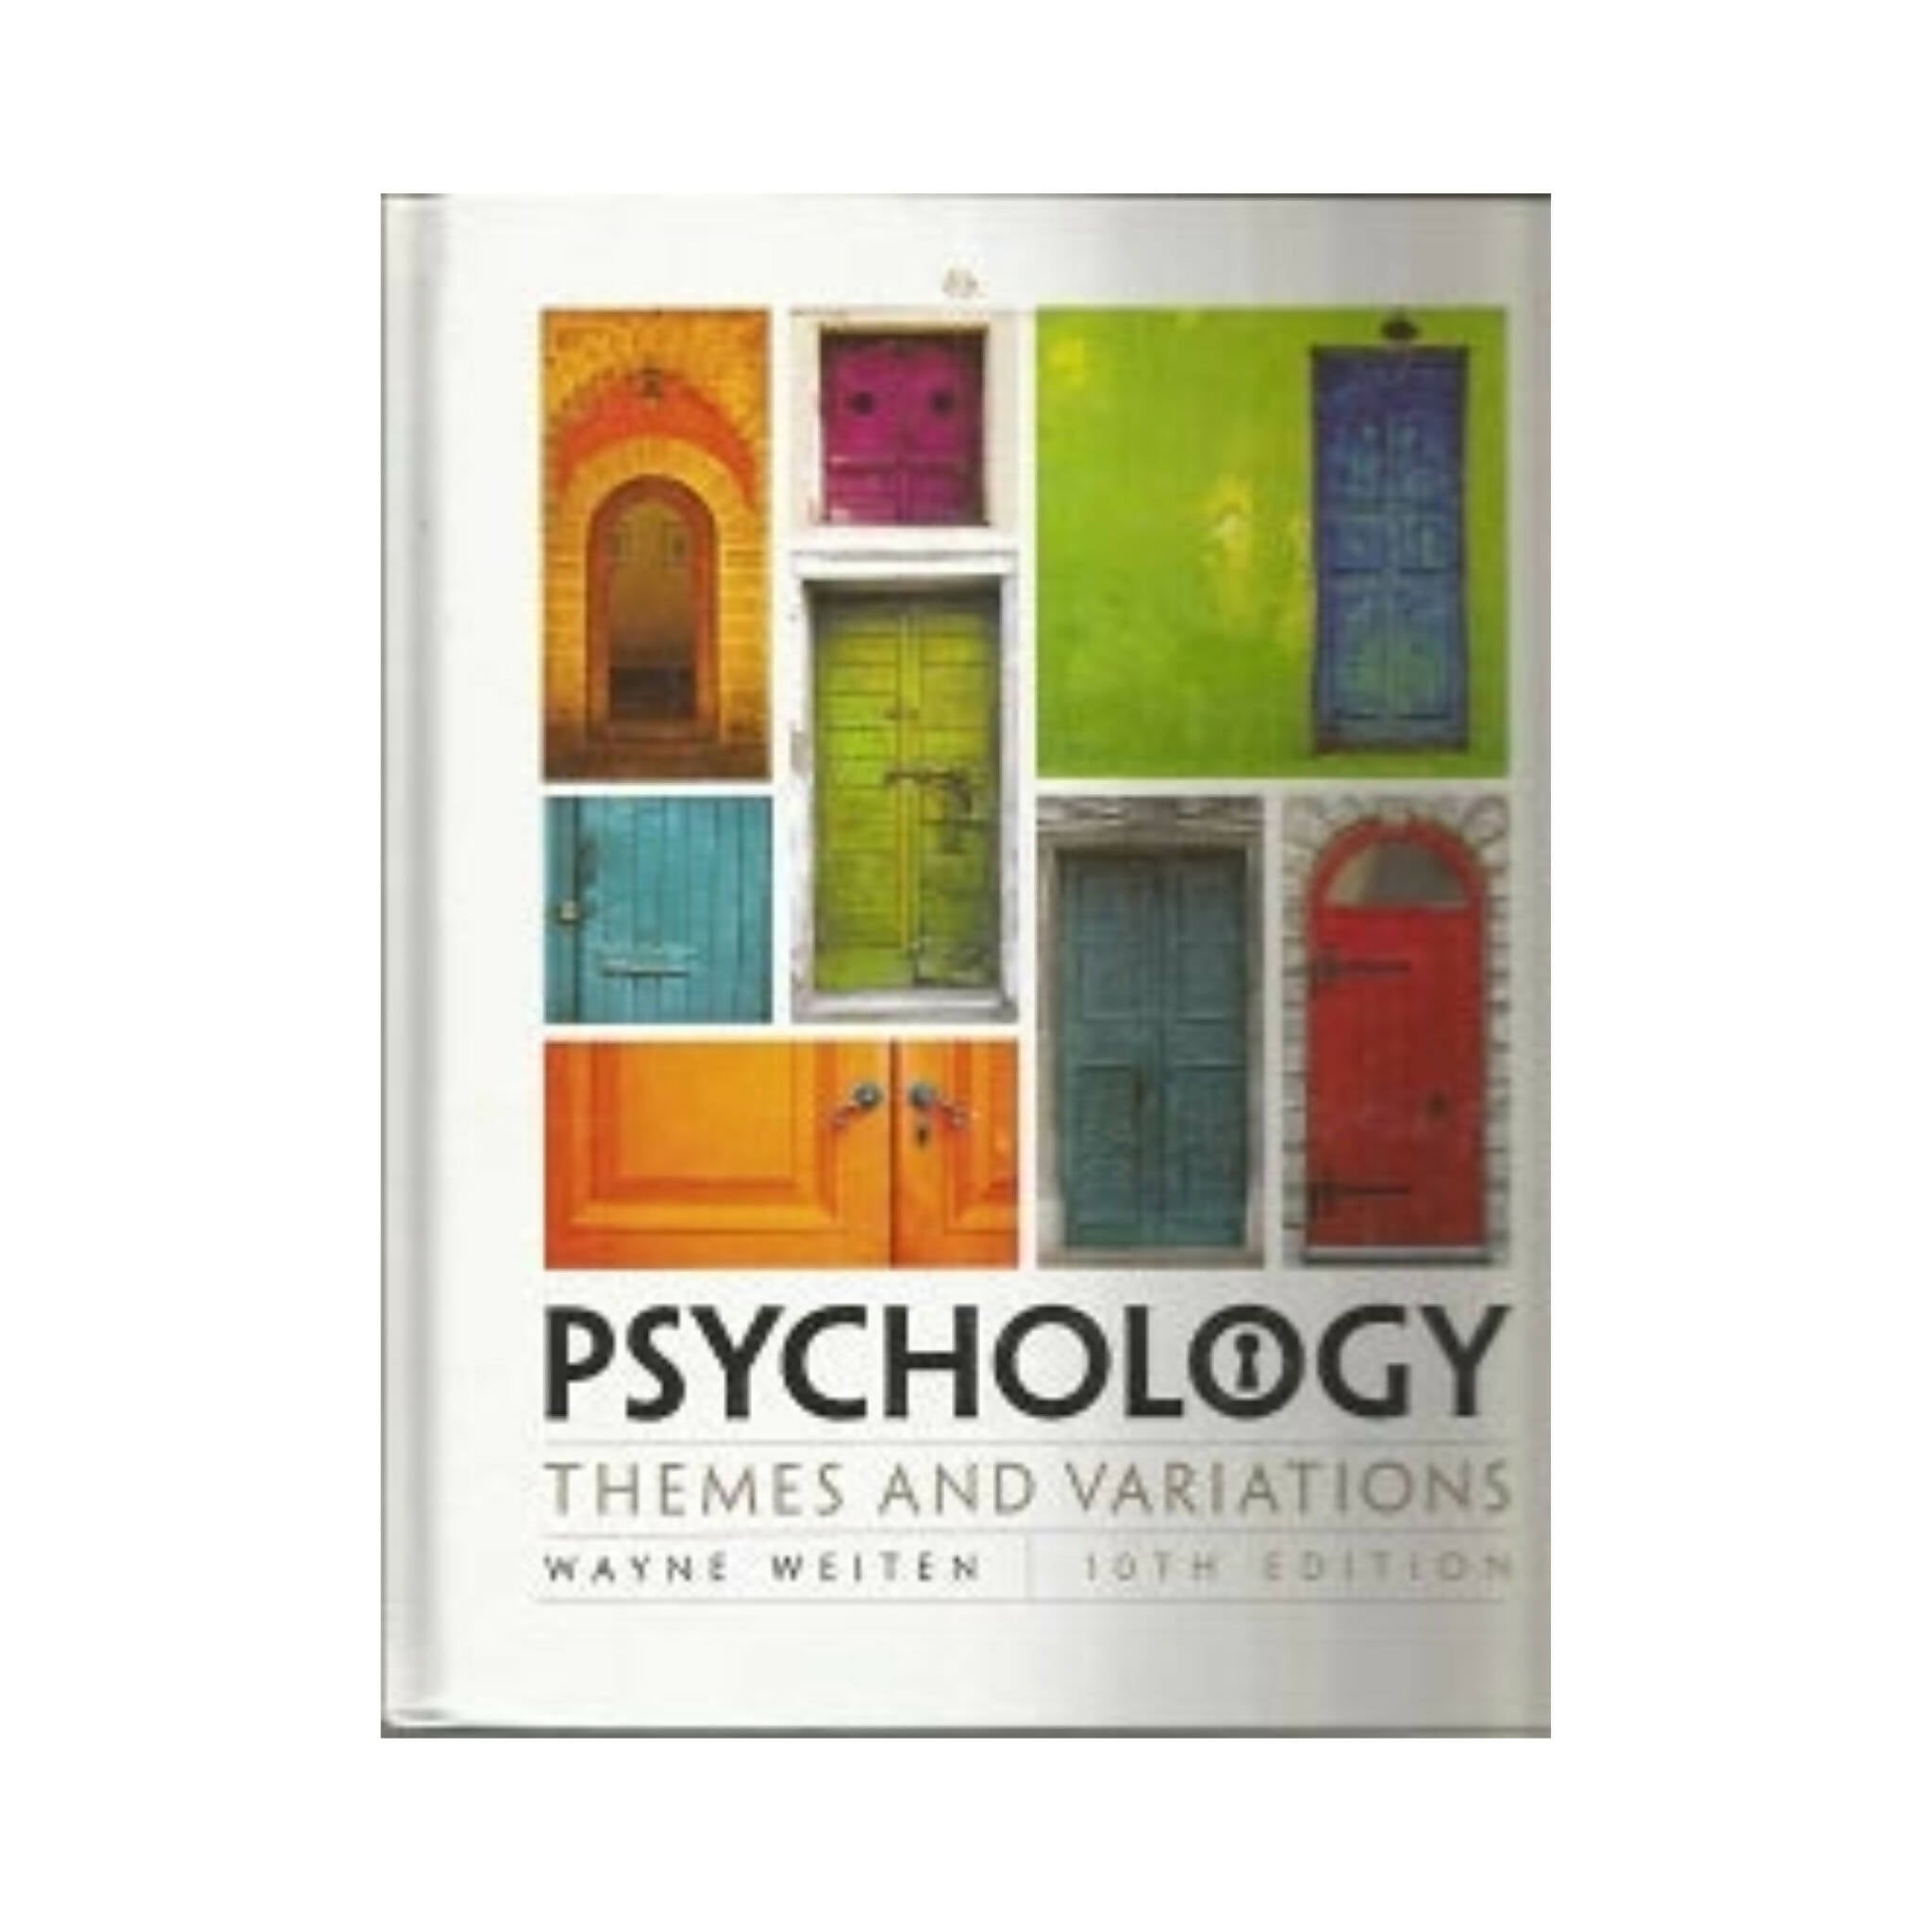 Book, Psychology, Themes and Variations